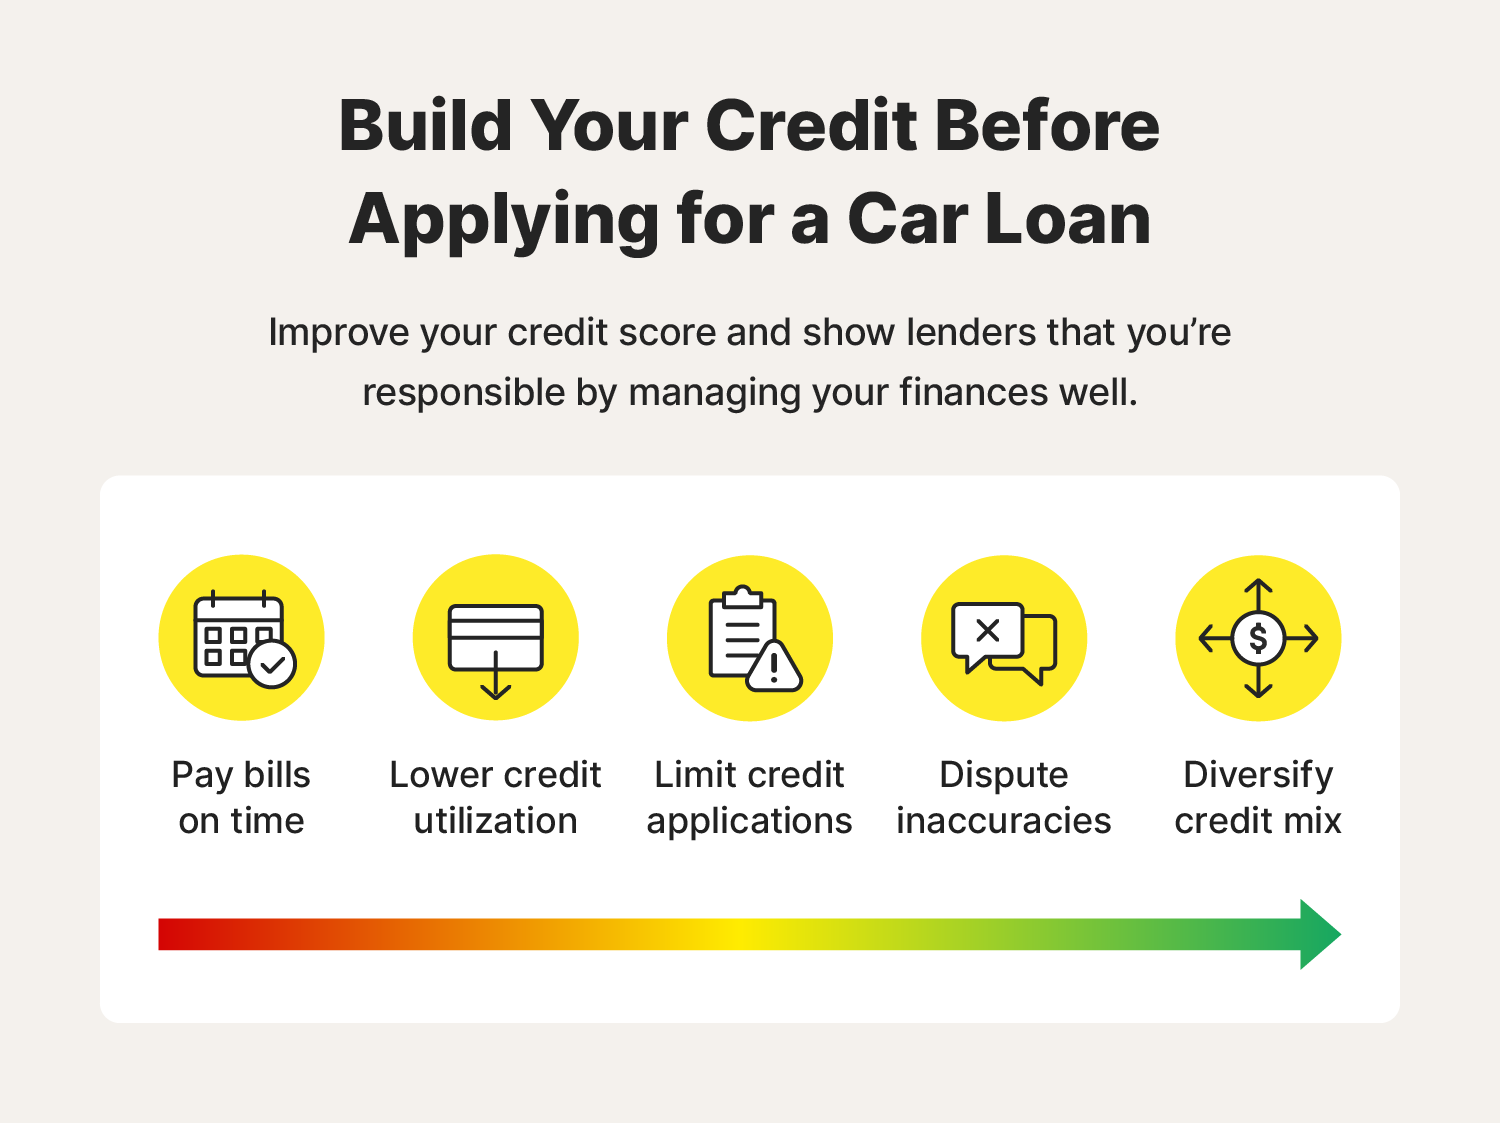 An image with tips on how to improve your credit score before applying for a car loan. 